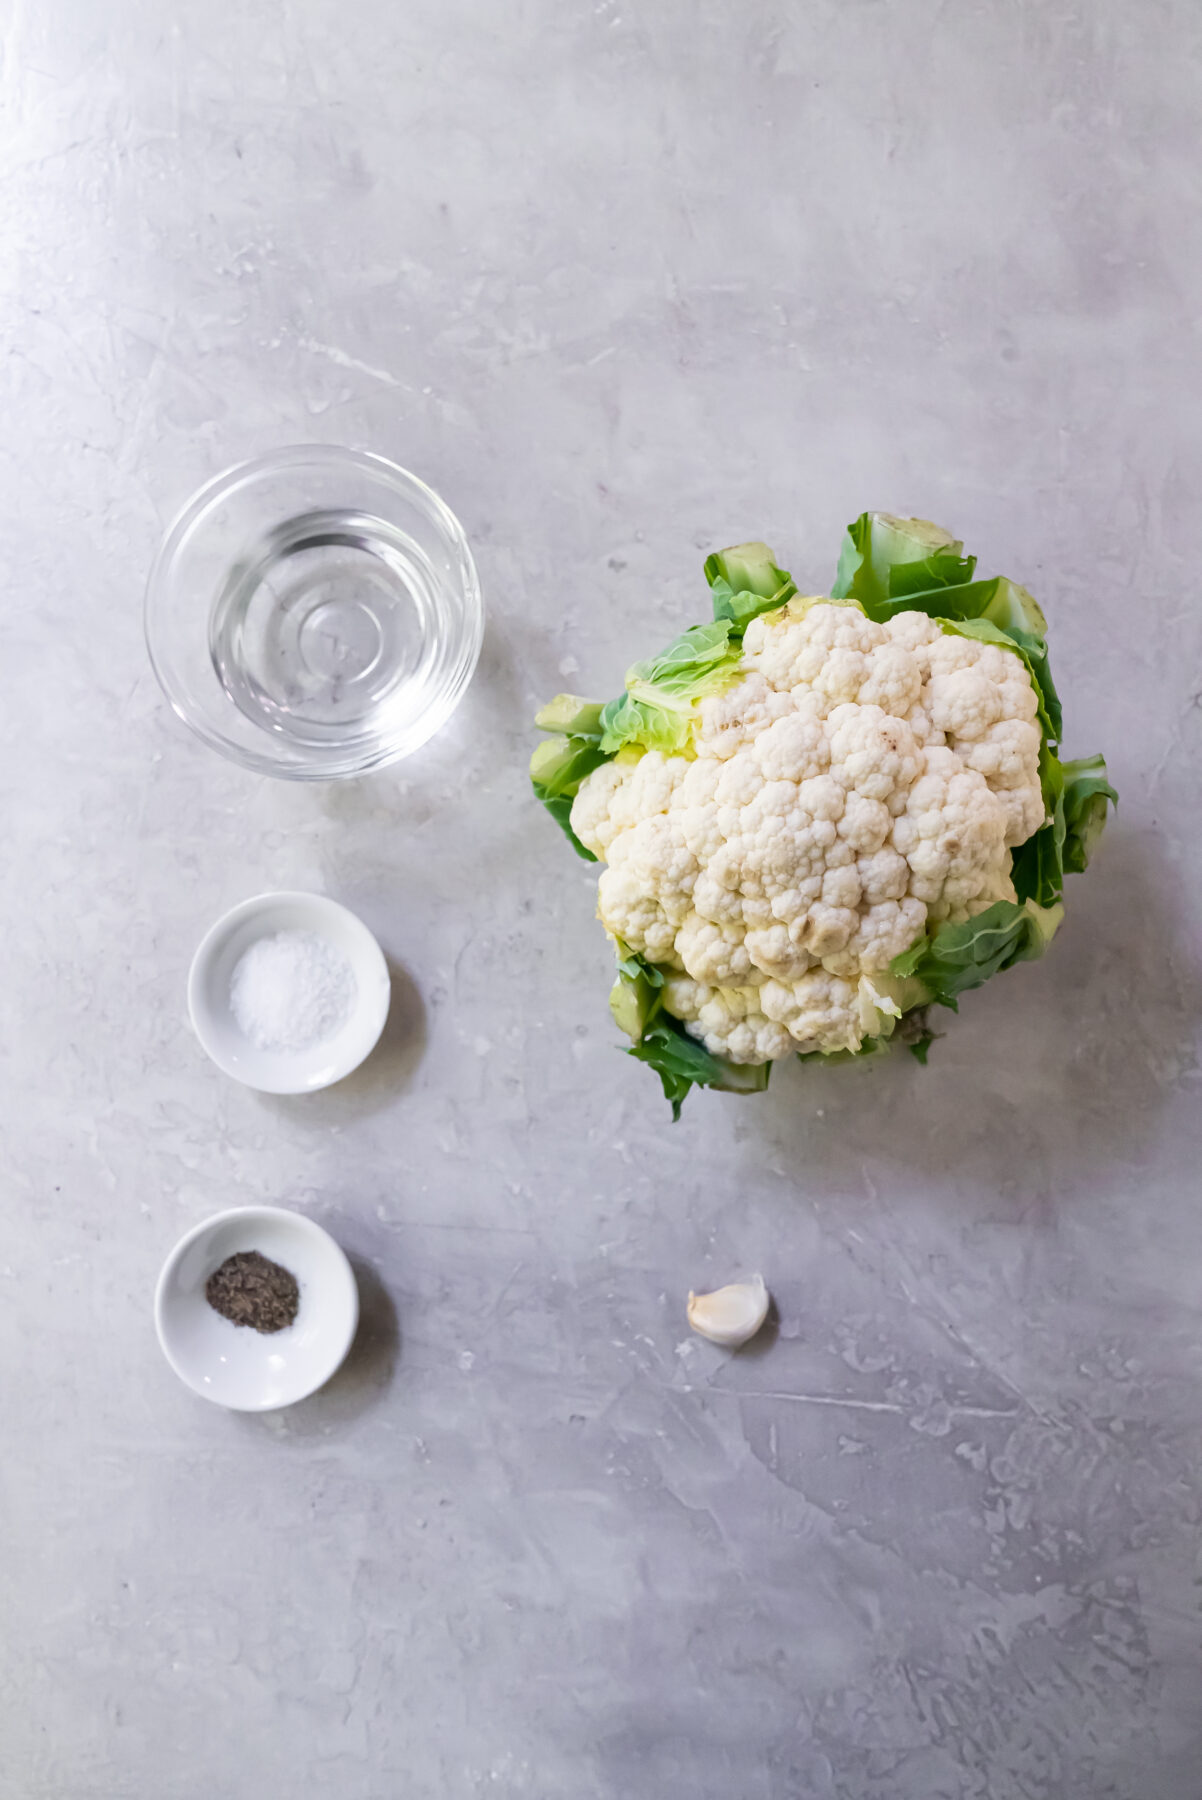 Ingredients consisting of water, salt, pepper, one garlic clove and one head of cauliflower on a white countertop.